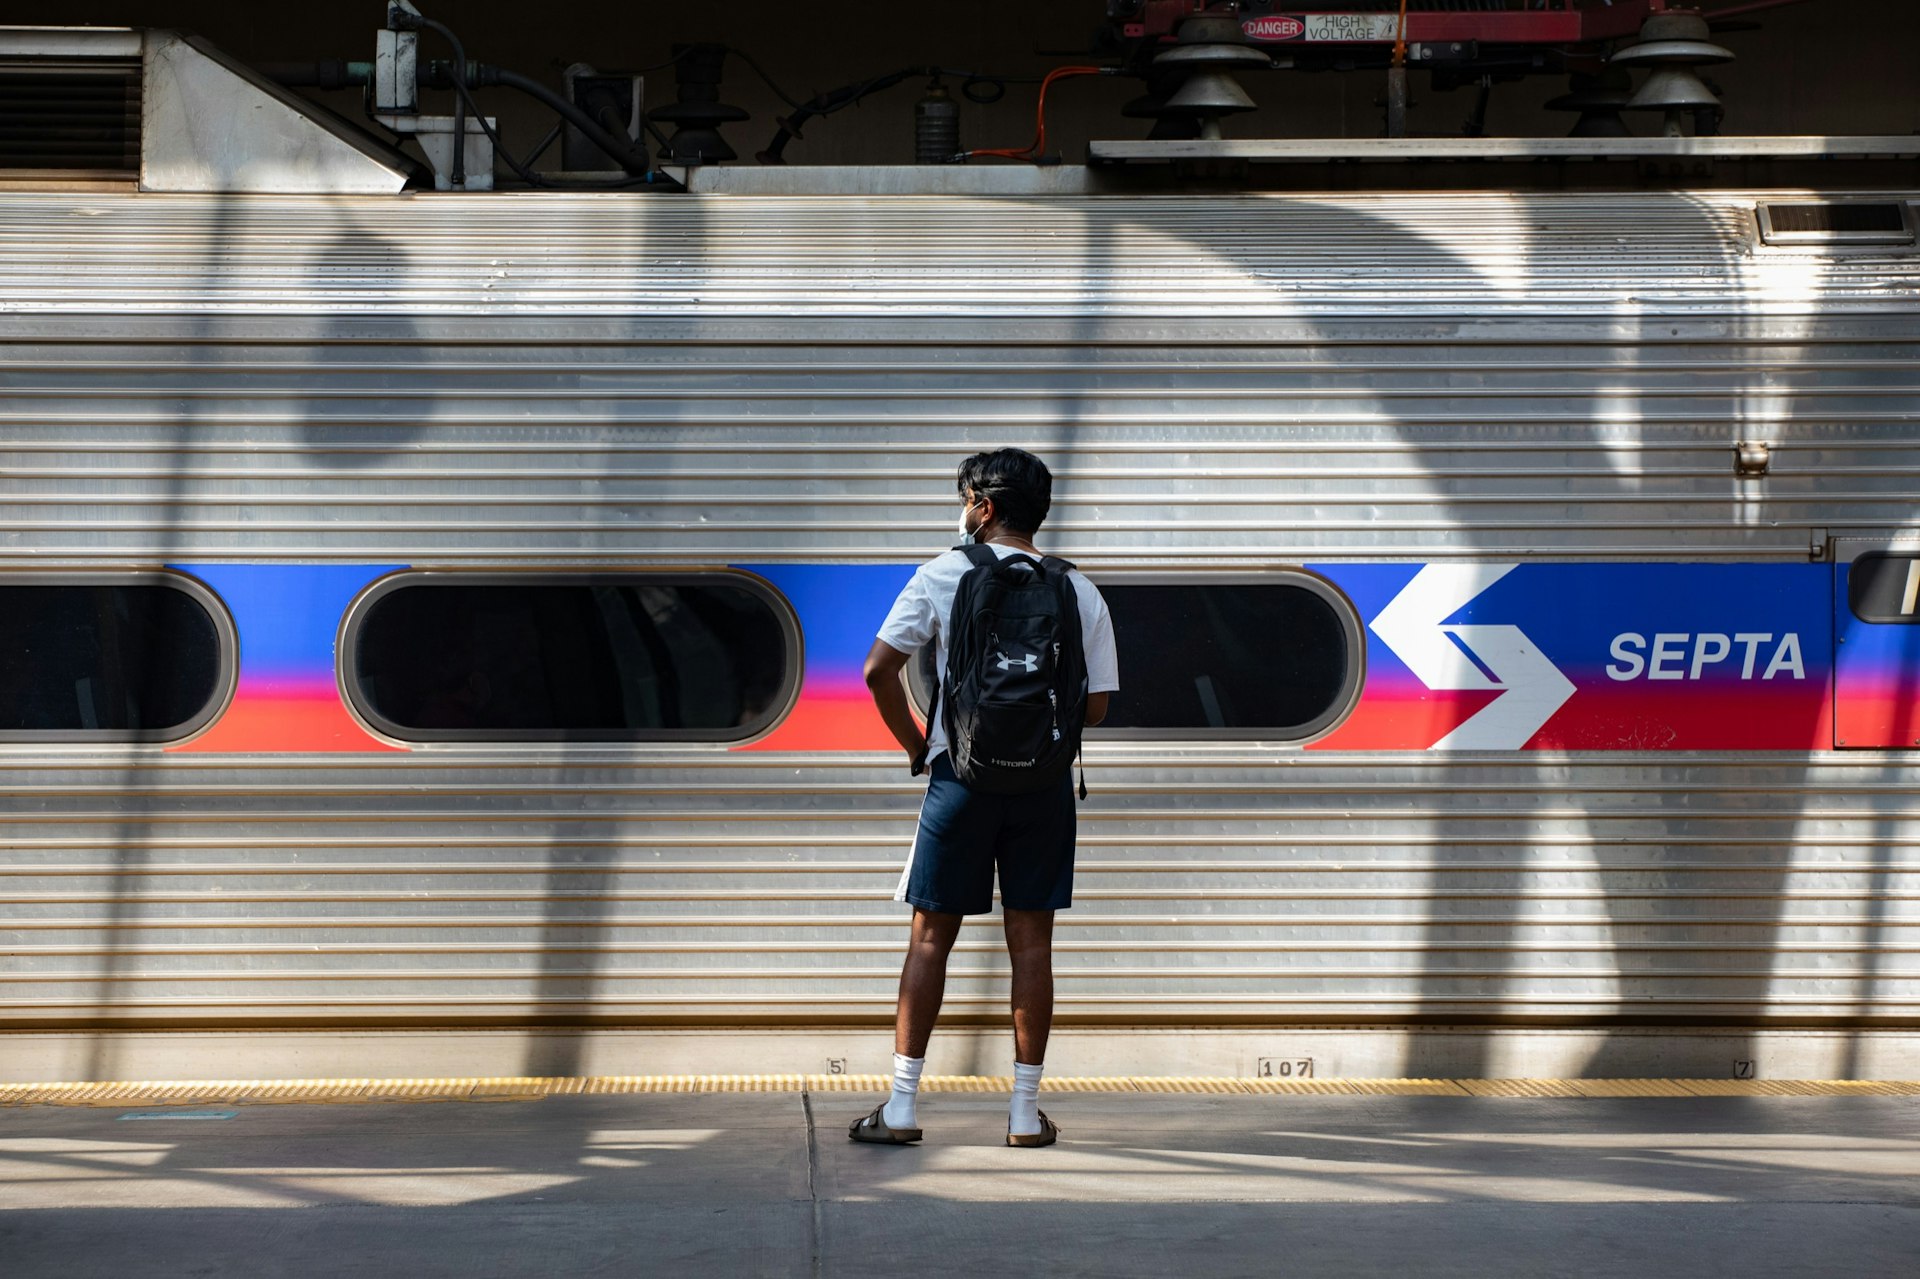 A man wearing shorts and a backpack stands on the platform in front of the SEPTA train car. 